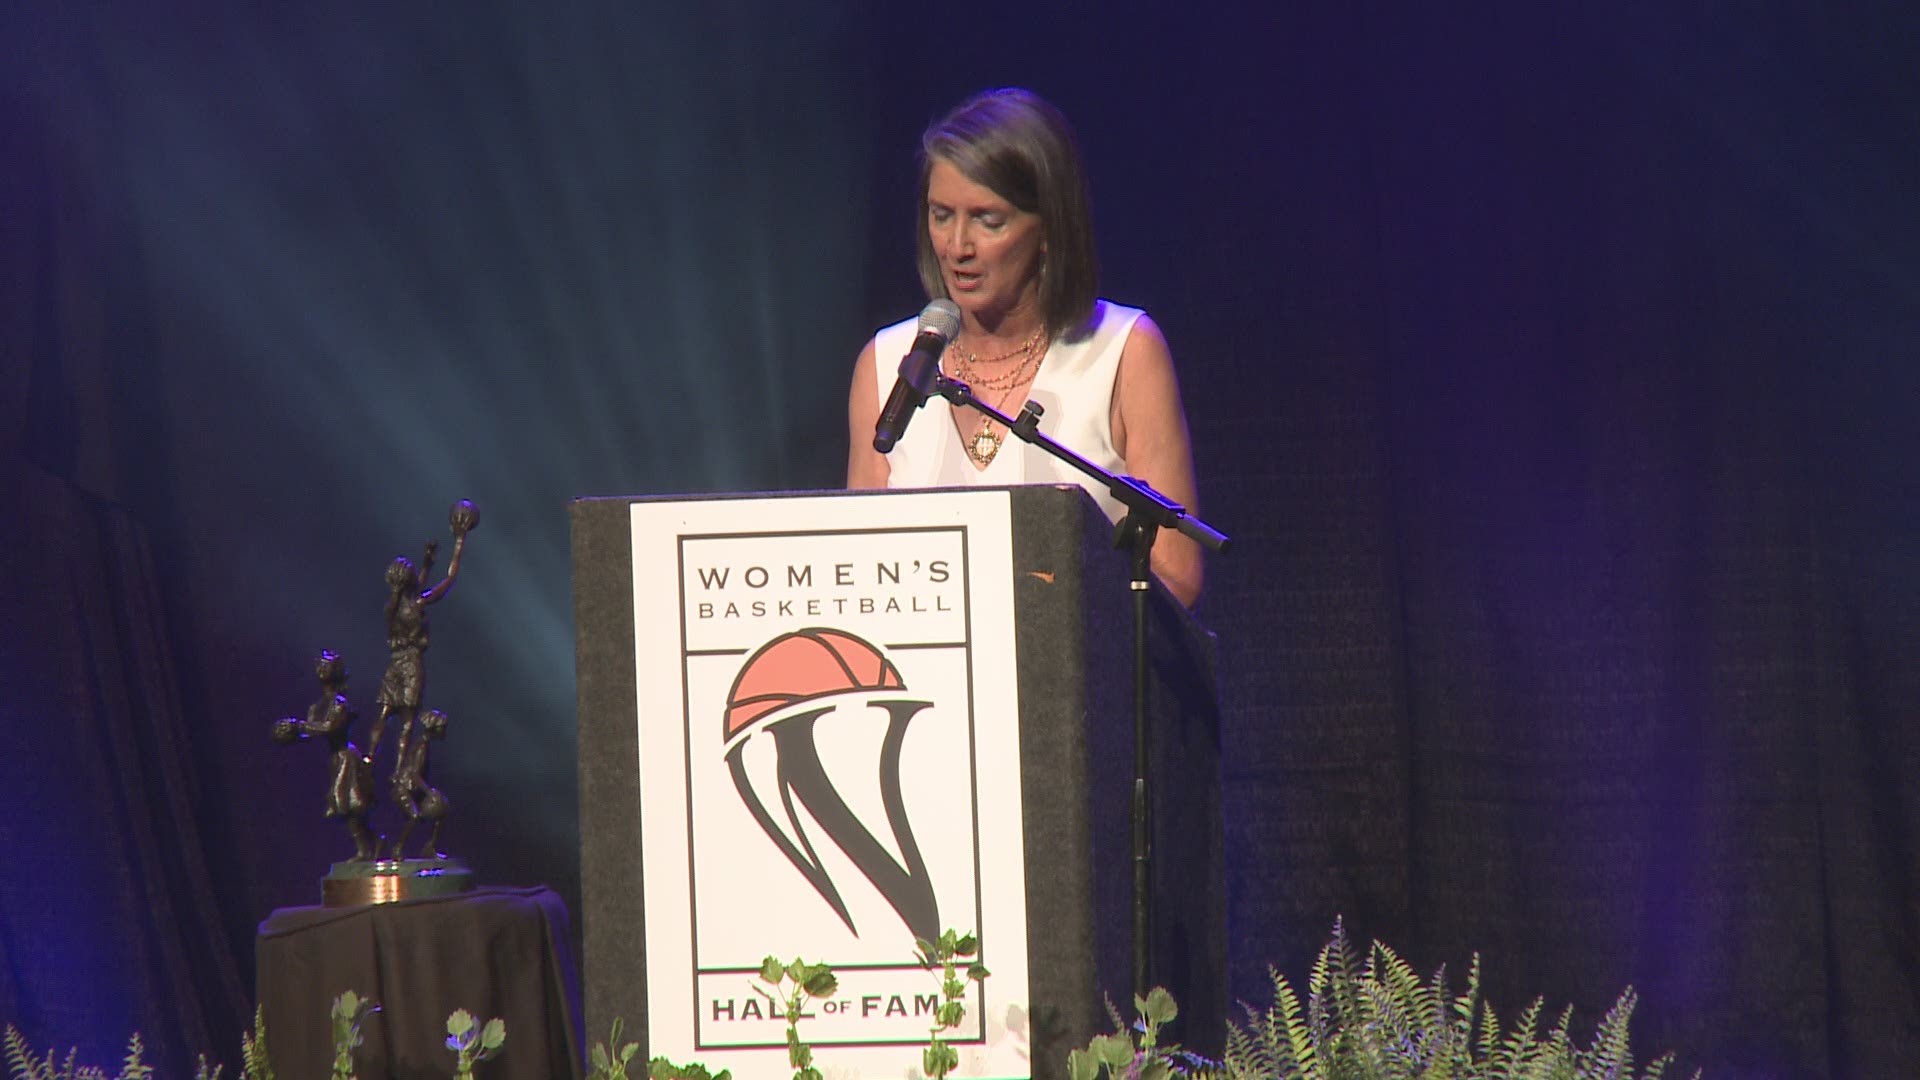 Former Lady Vols assistant coach Mickie DeMoss was inducted into the Women's Basketball Hall of Fame on June 9, 2018. DeMoss won six national championships at Tennessee.